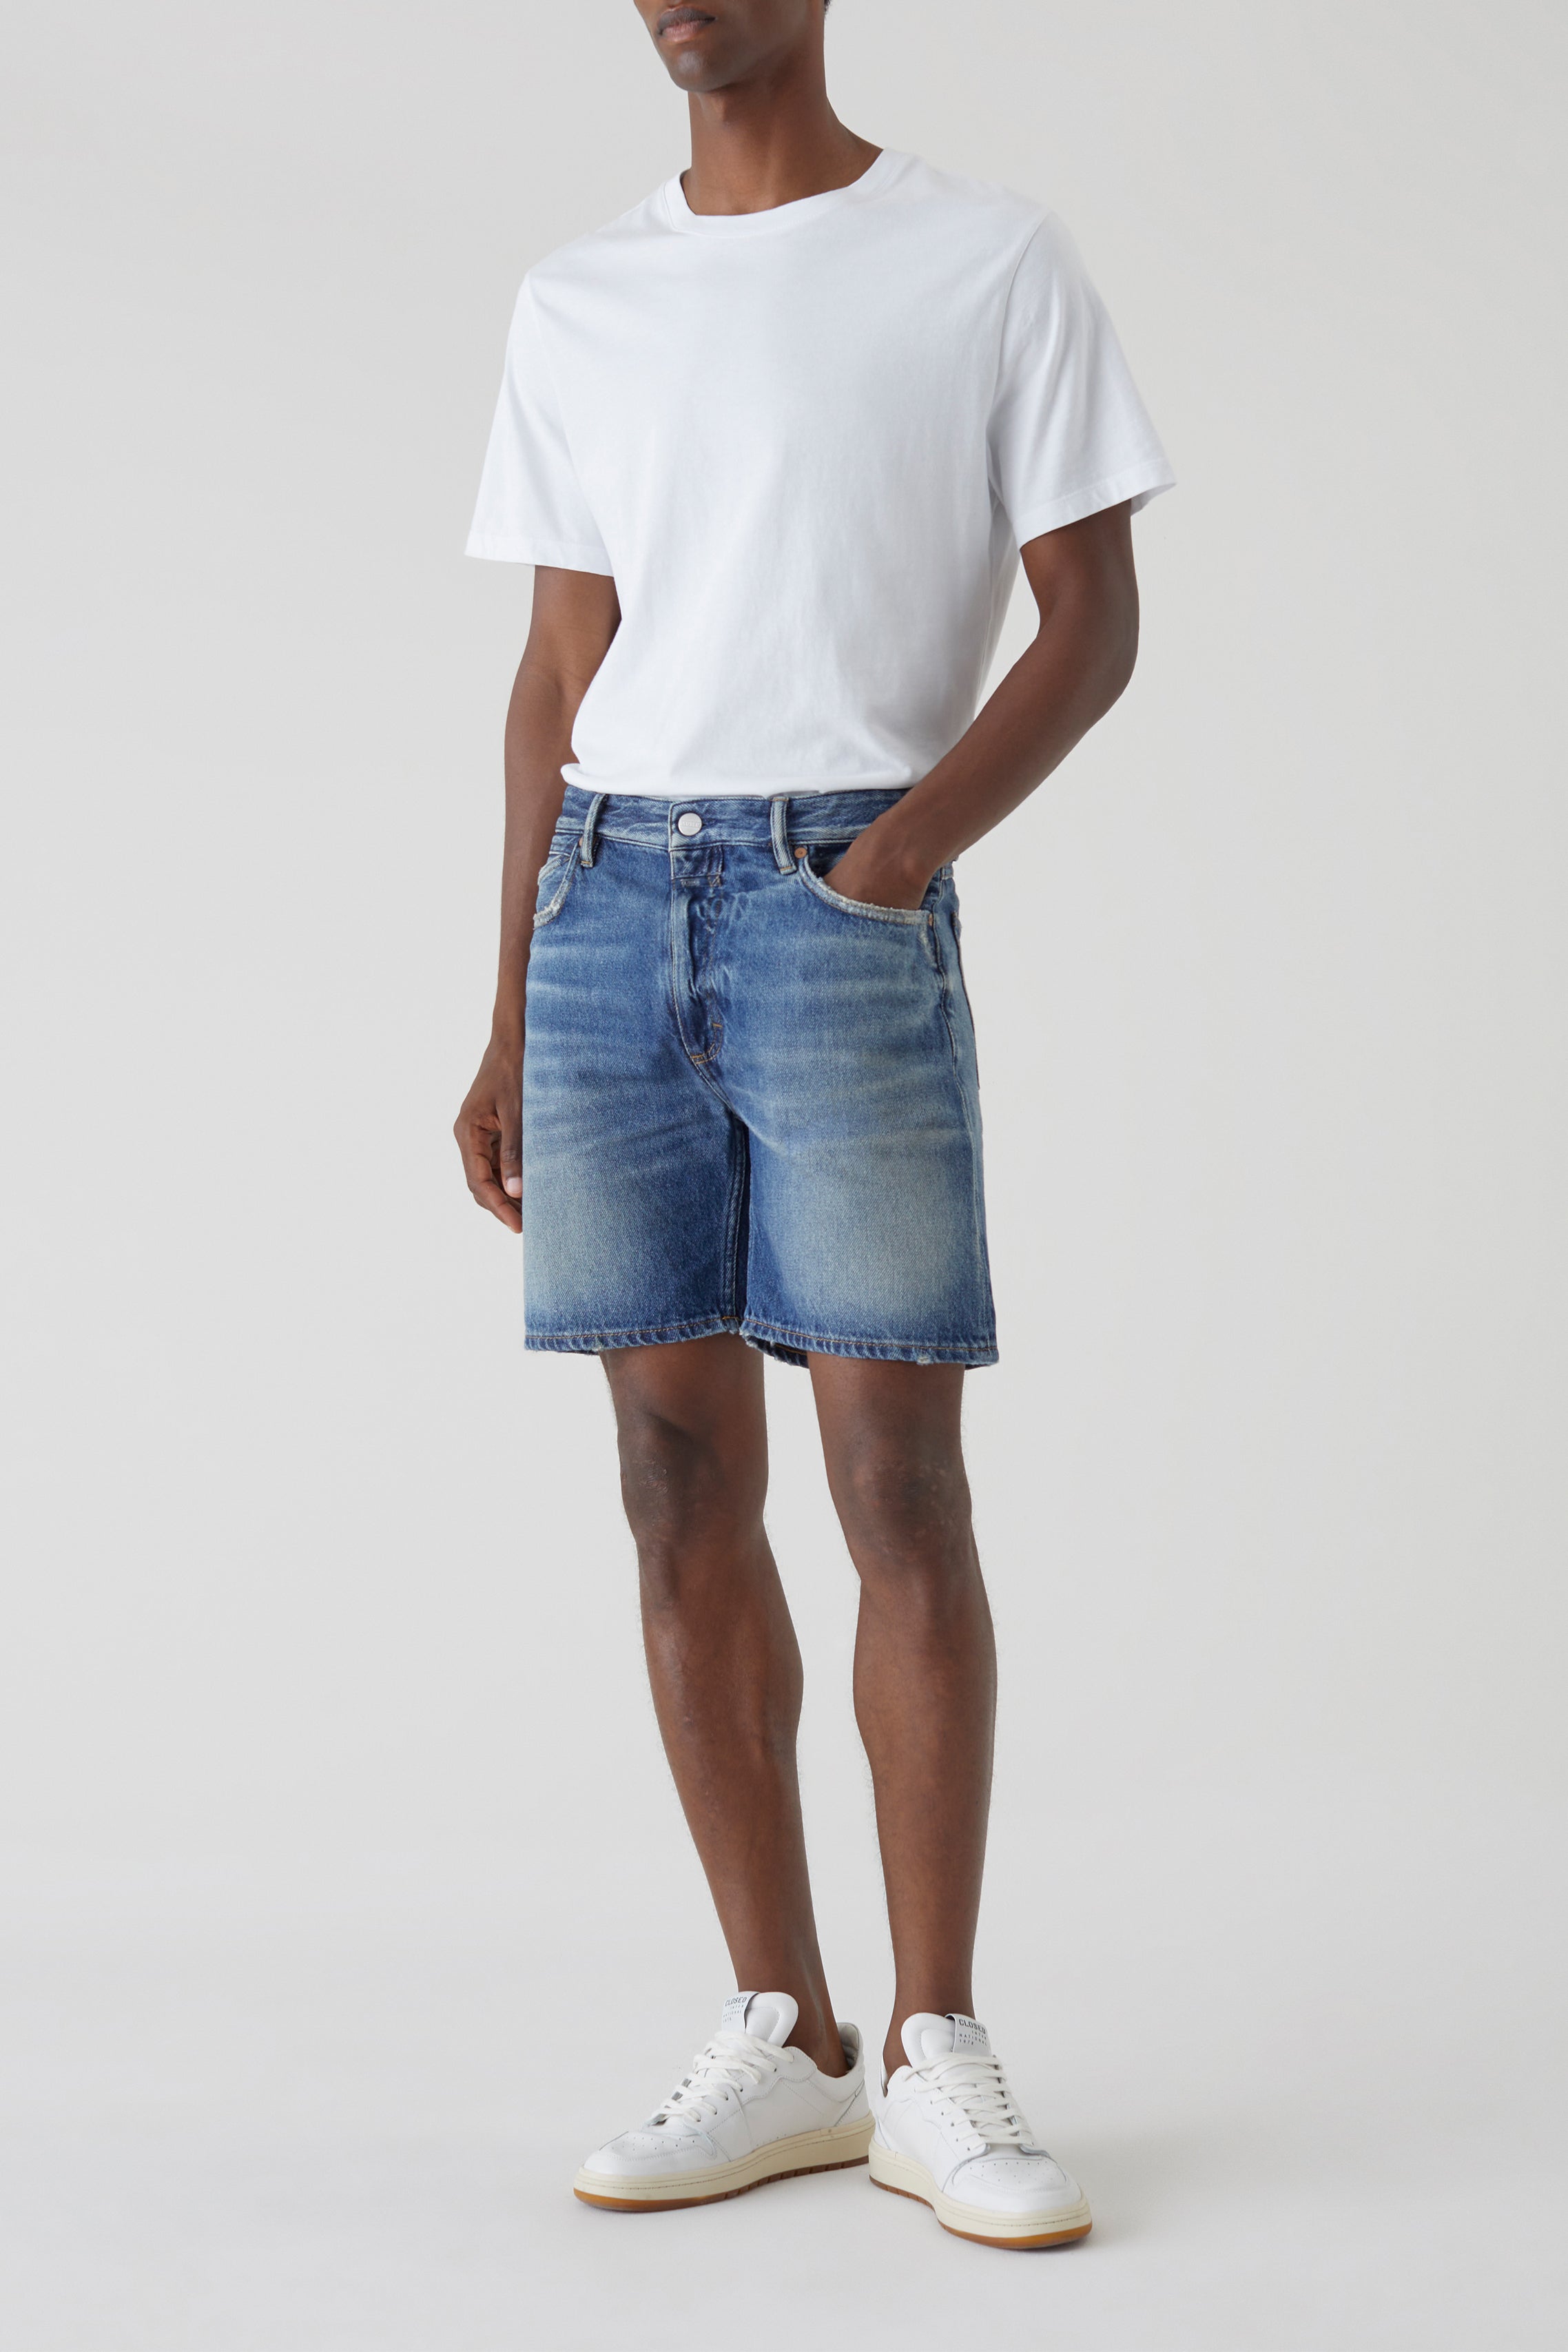 CLOSED-OUTLET-SALE-STYLE-NAME-BOGUS-SHORTS-Hosen-ARCHIVE-COLLECTION_1ebefa3a-0355-4032-818b-994f8c7a91b3.jpg